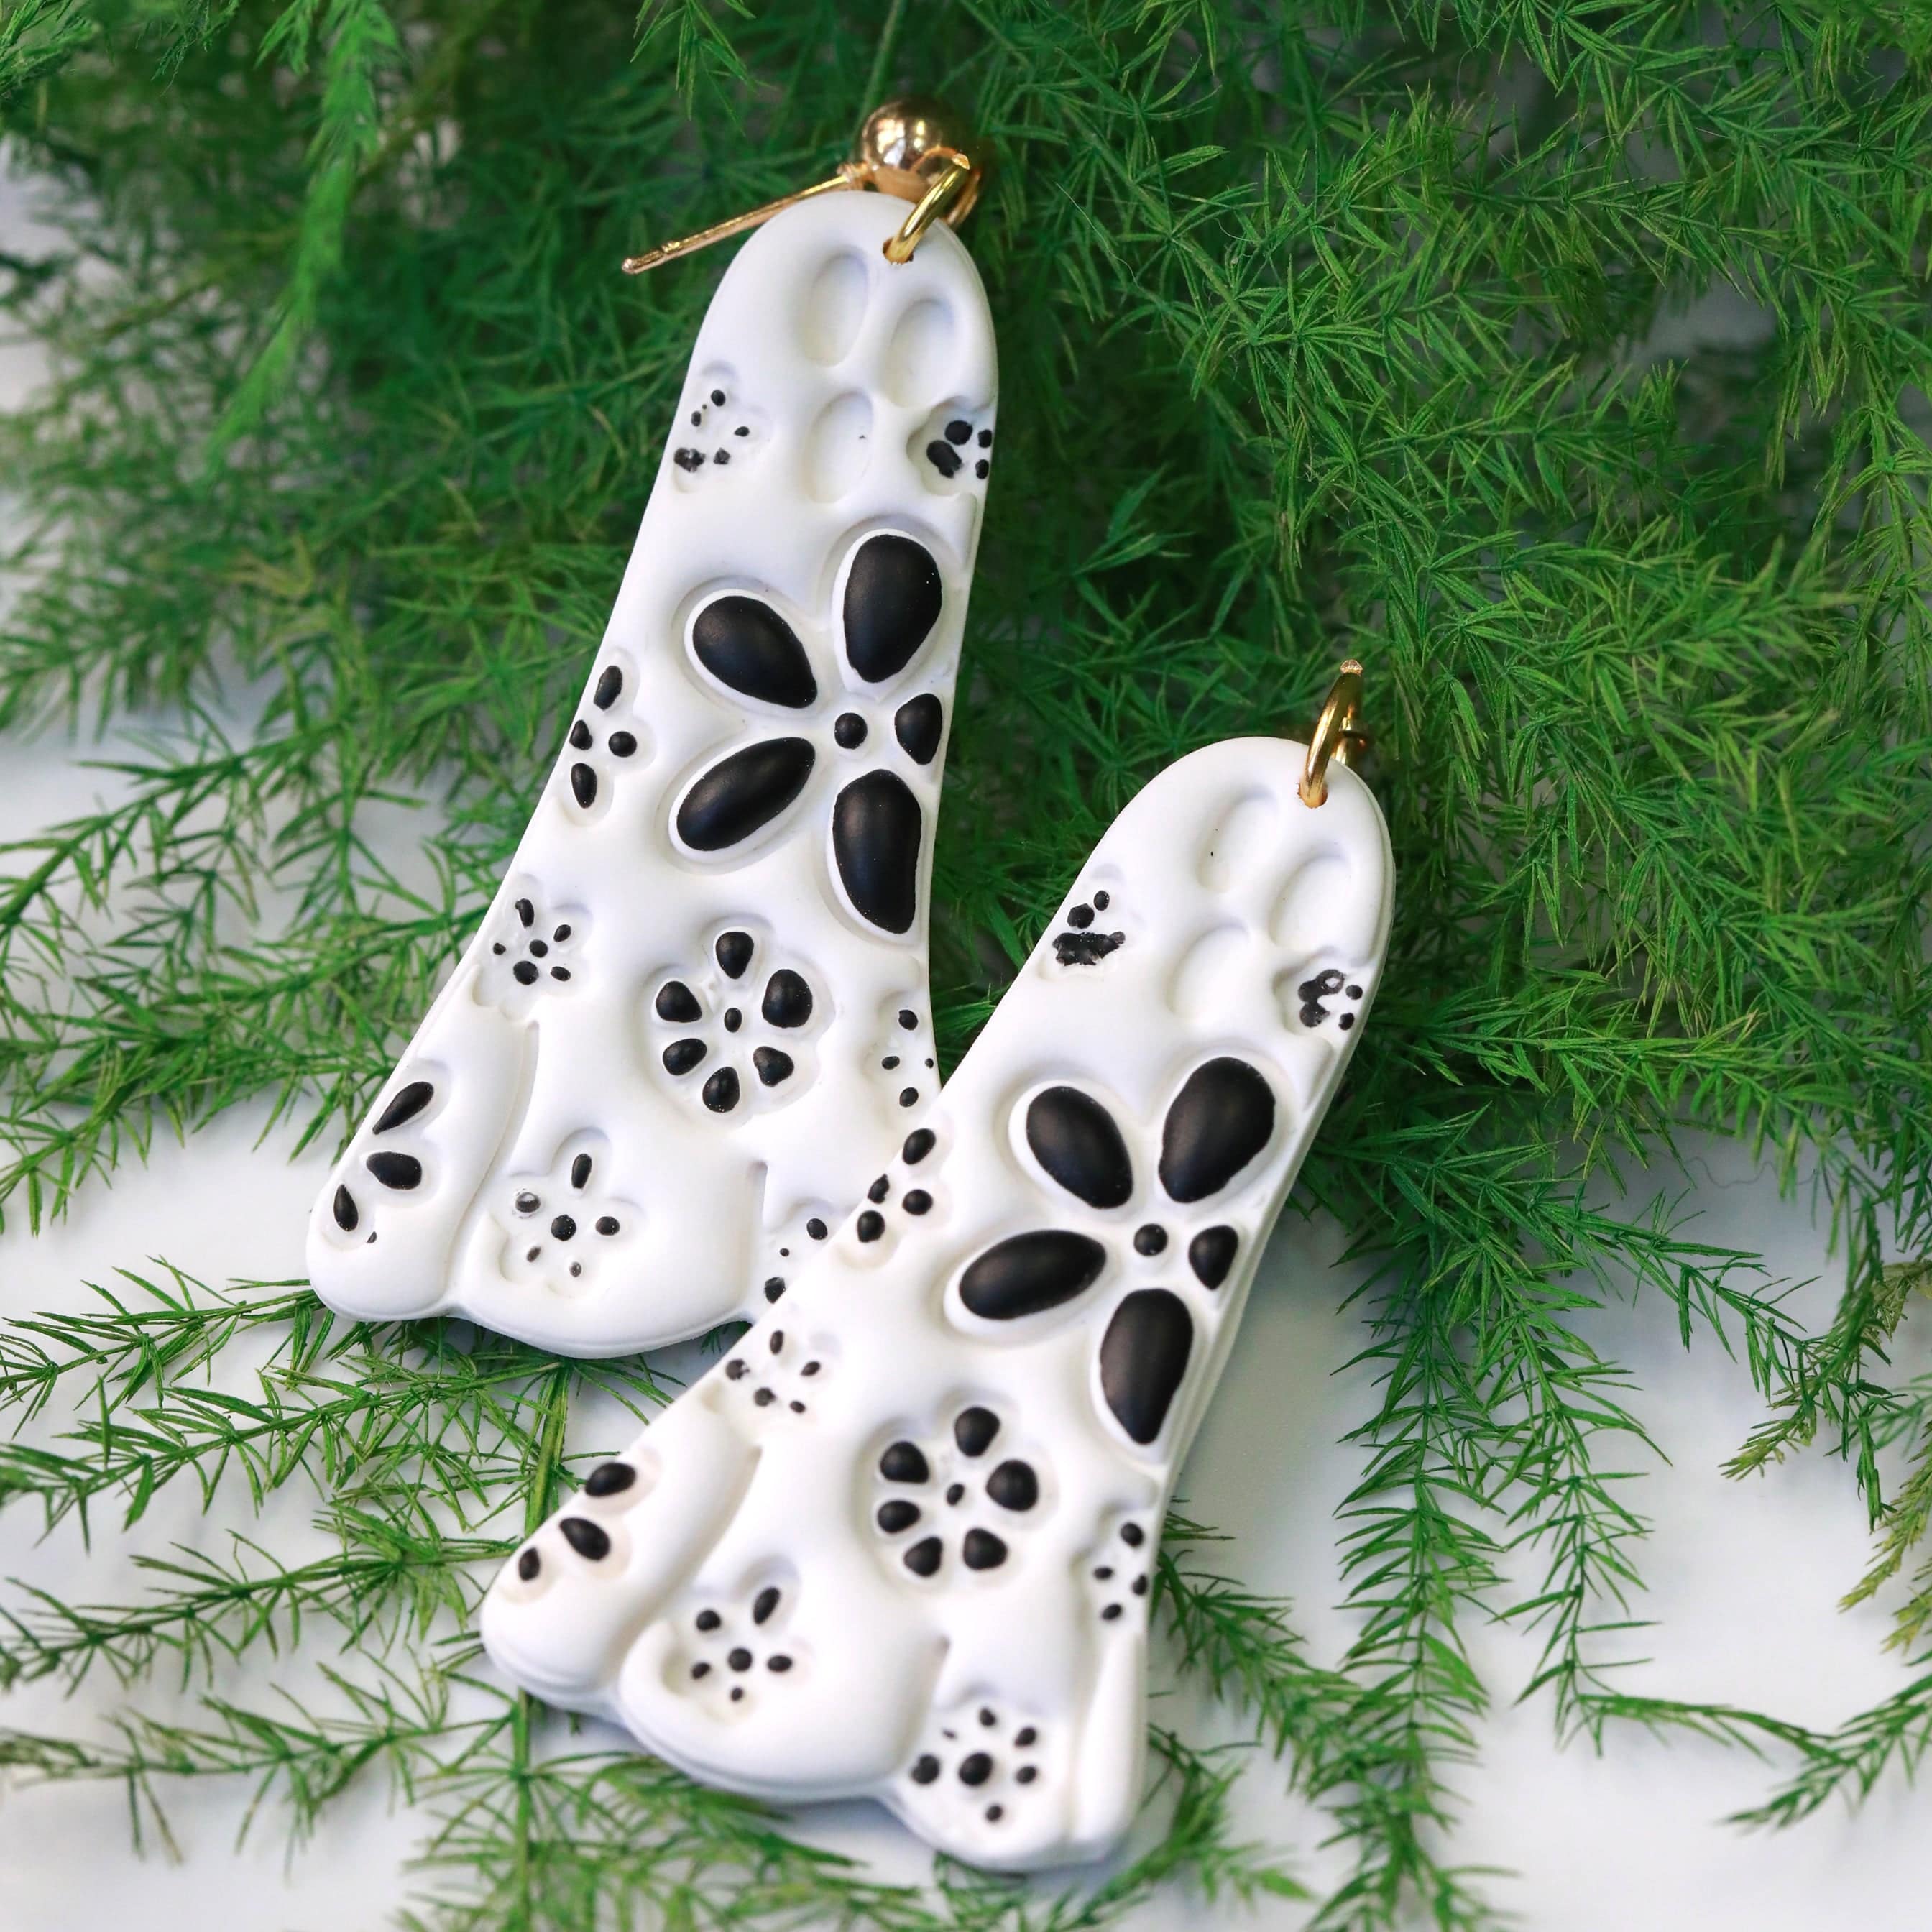 daisy ghost clay earrings in black and white by everything ky and i white on green